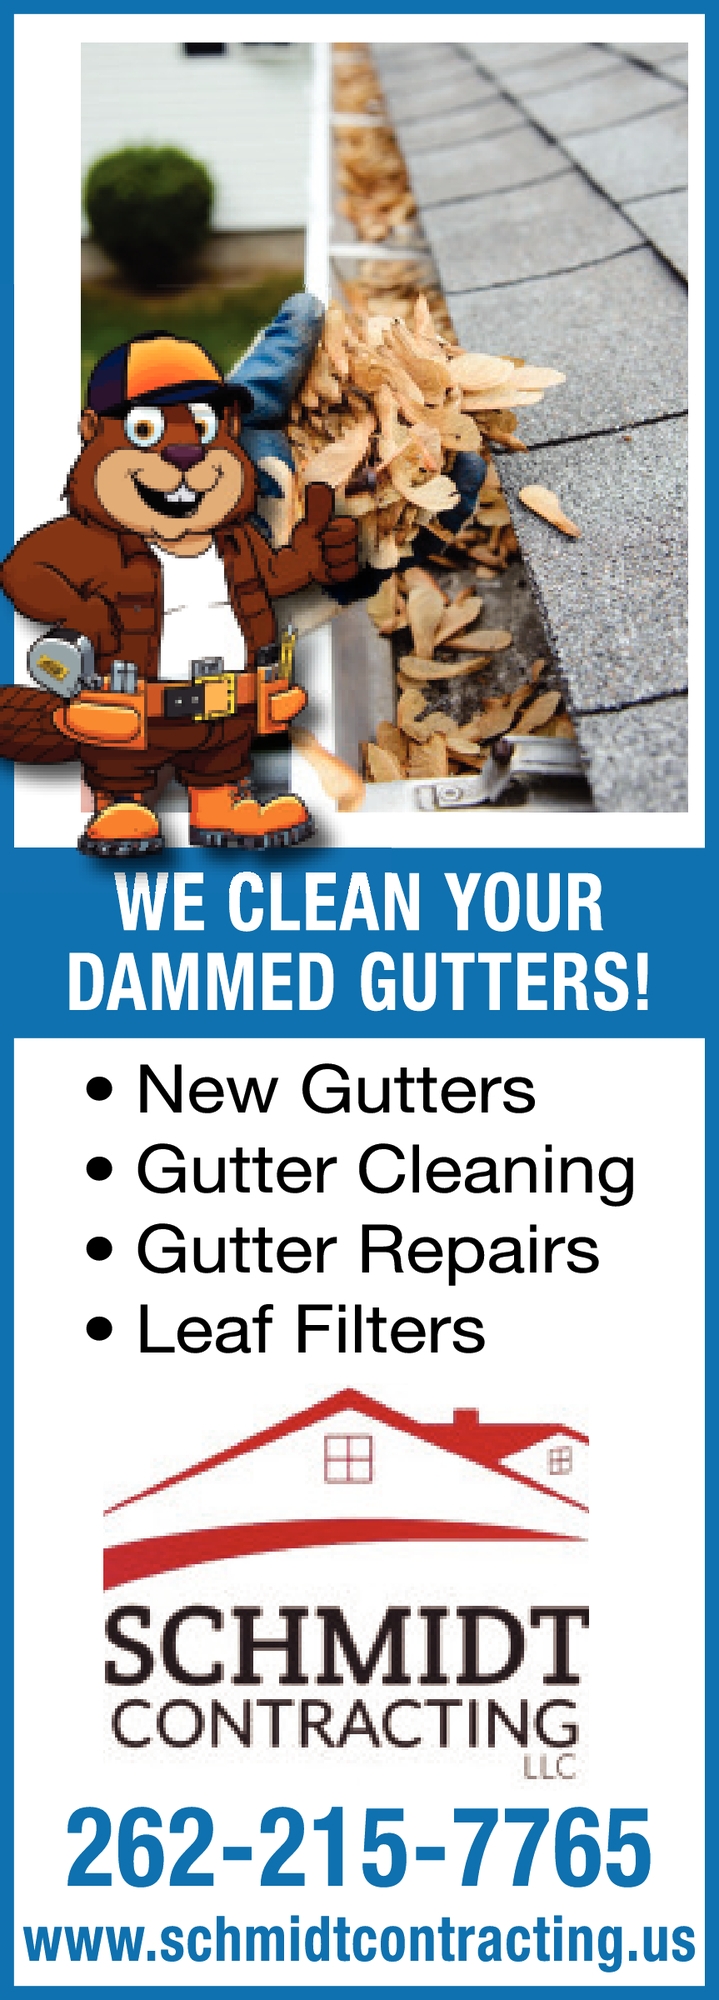 We Clean Your Dammed Gutters!